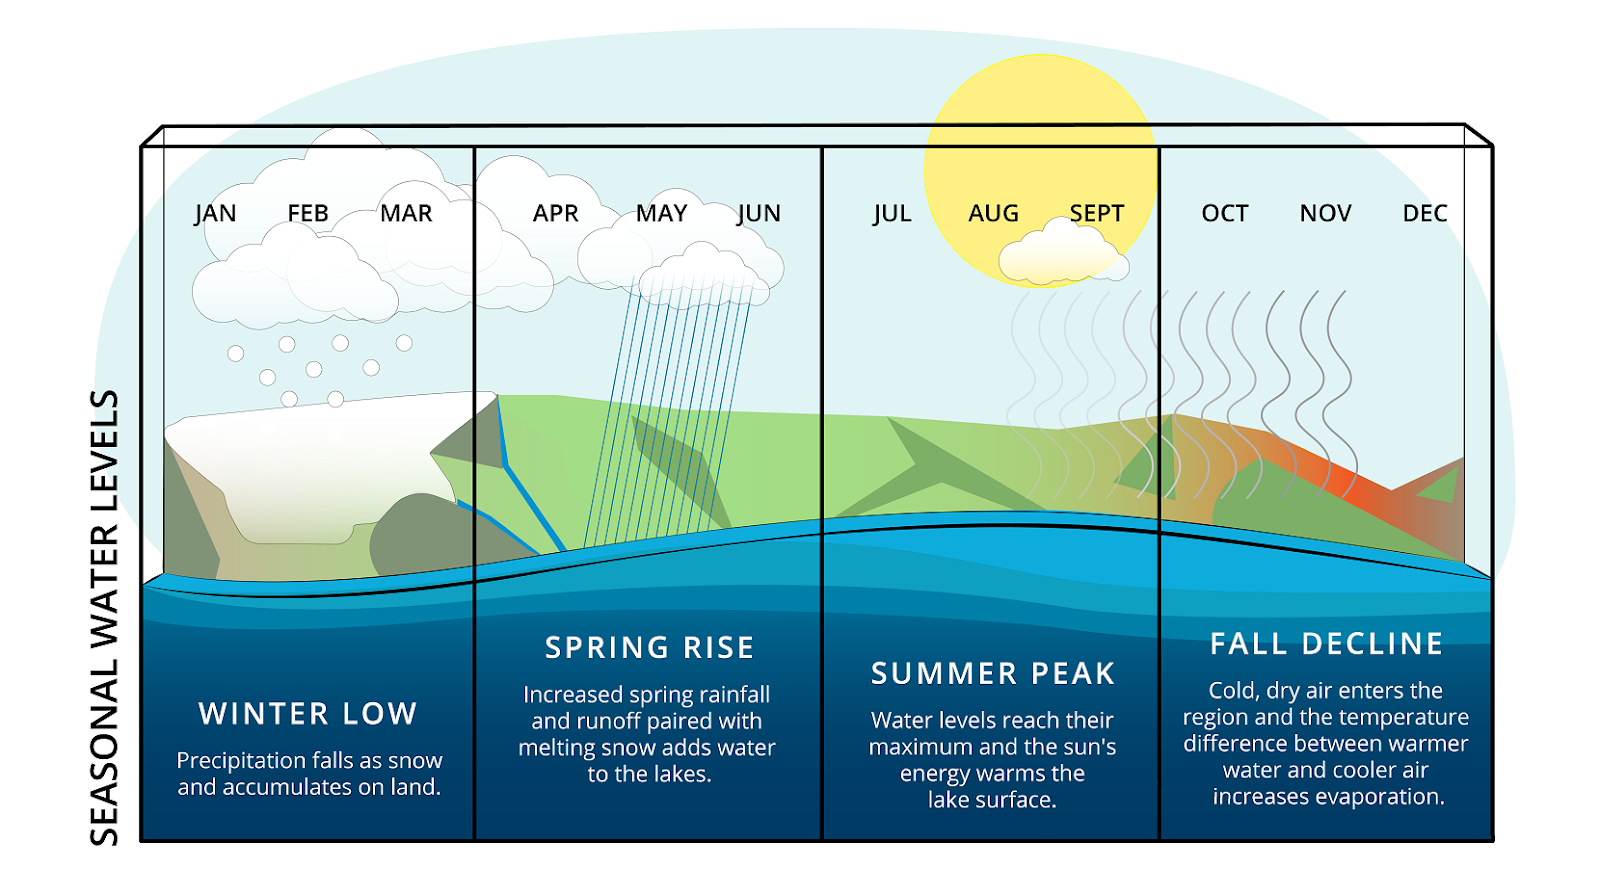 Graphic showing land in the background and water in the foreground, divided into four panels corresponding with the seasons. Text describes the water level changes throughout the year: Winter low, spring rise, summer peak, and fall decline.